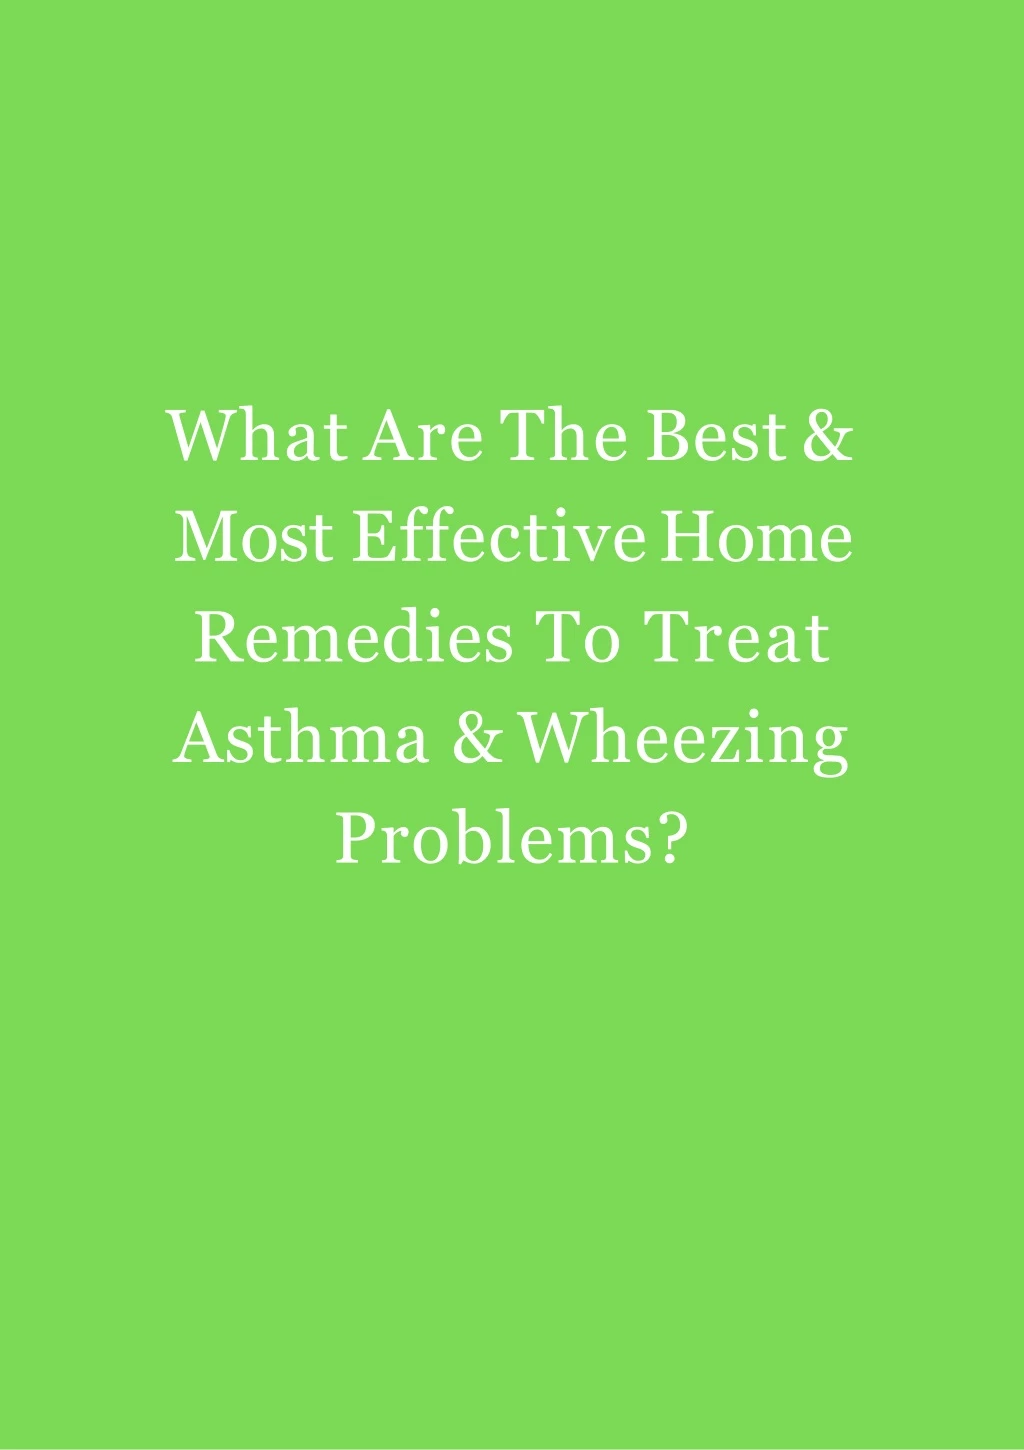 what are the best most effective home remedies to treat asthma wheezing problems